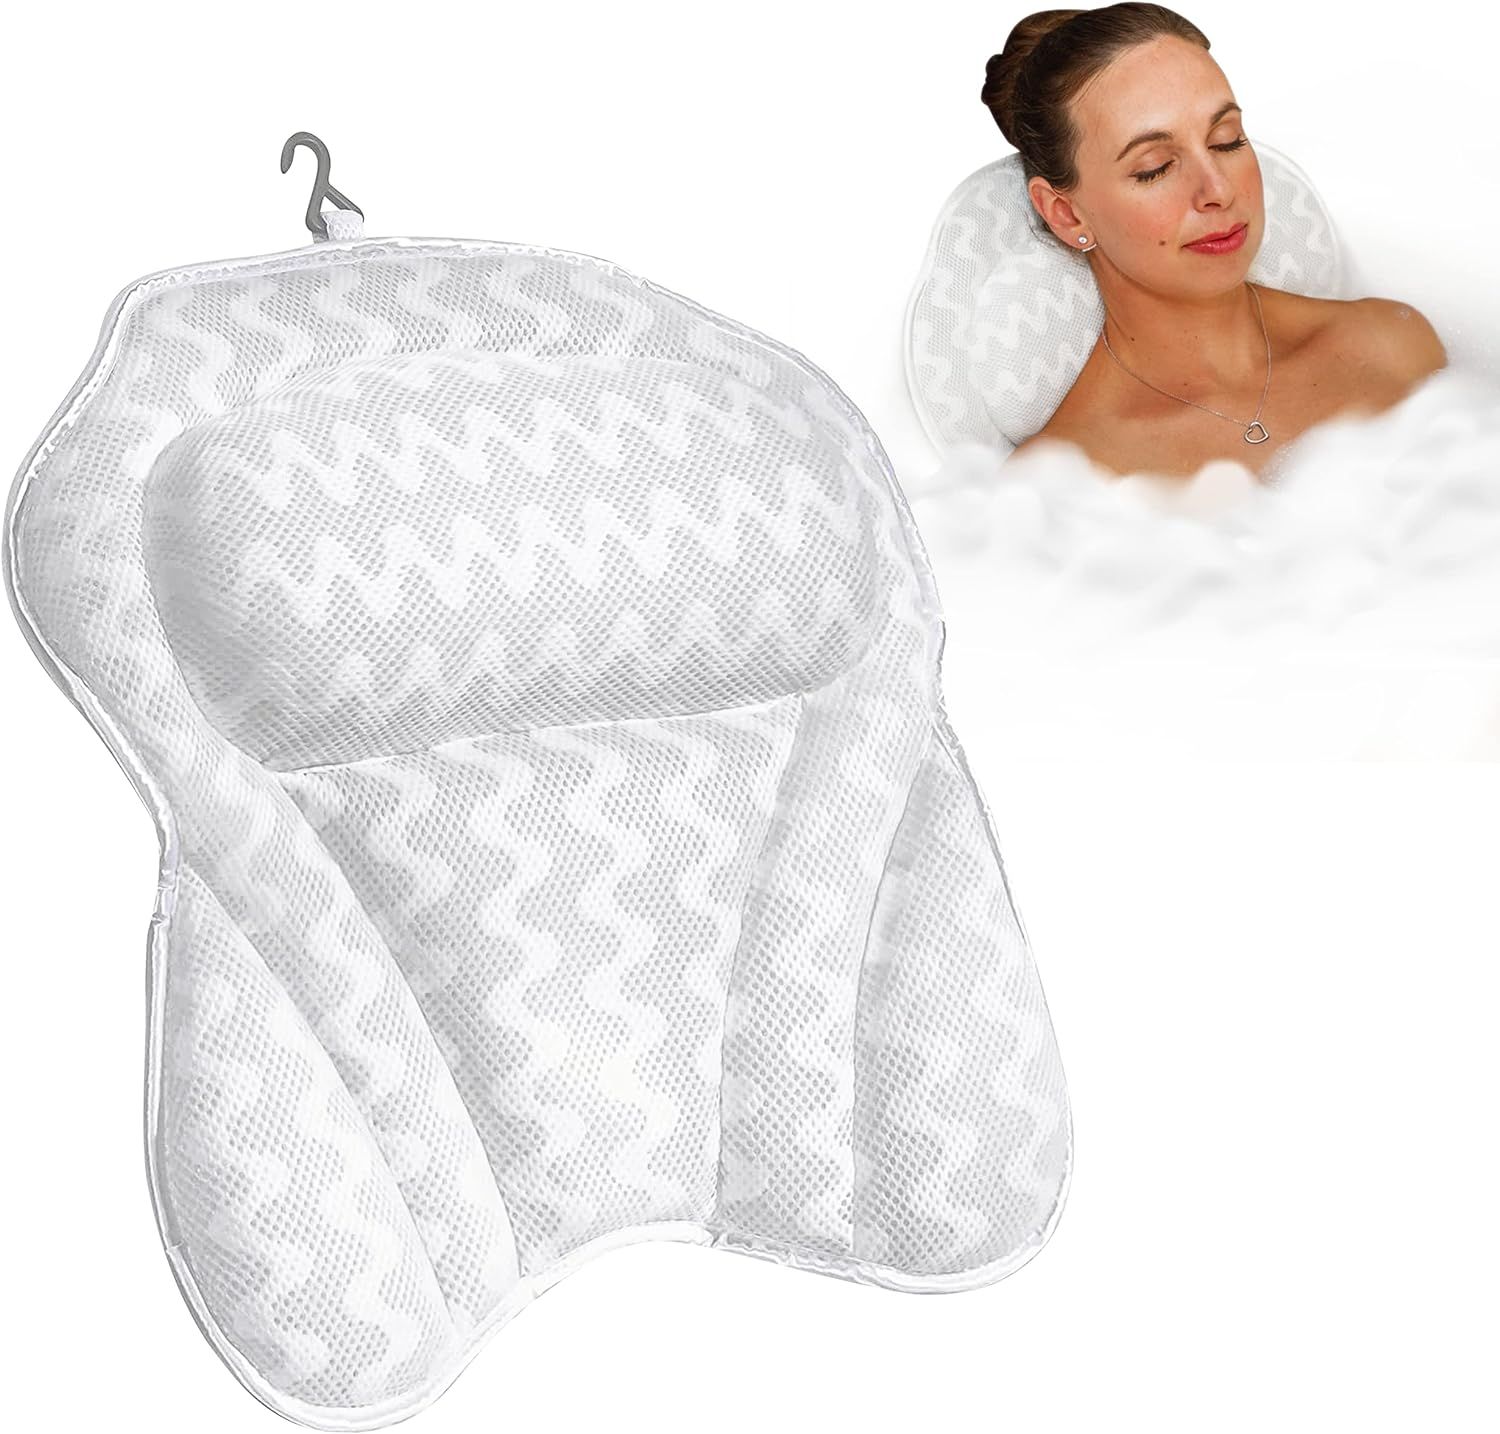 Bath Haven Bath Pillow for Women and Men - Spa Cushion for Jacuzzi and Tub - Portable, Relaxing H... | Amazon (US)